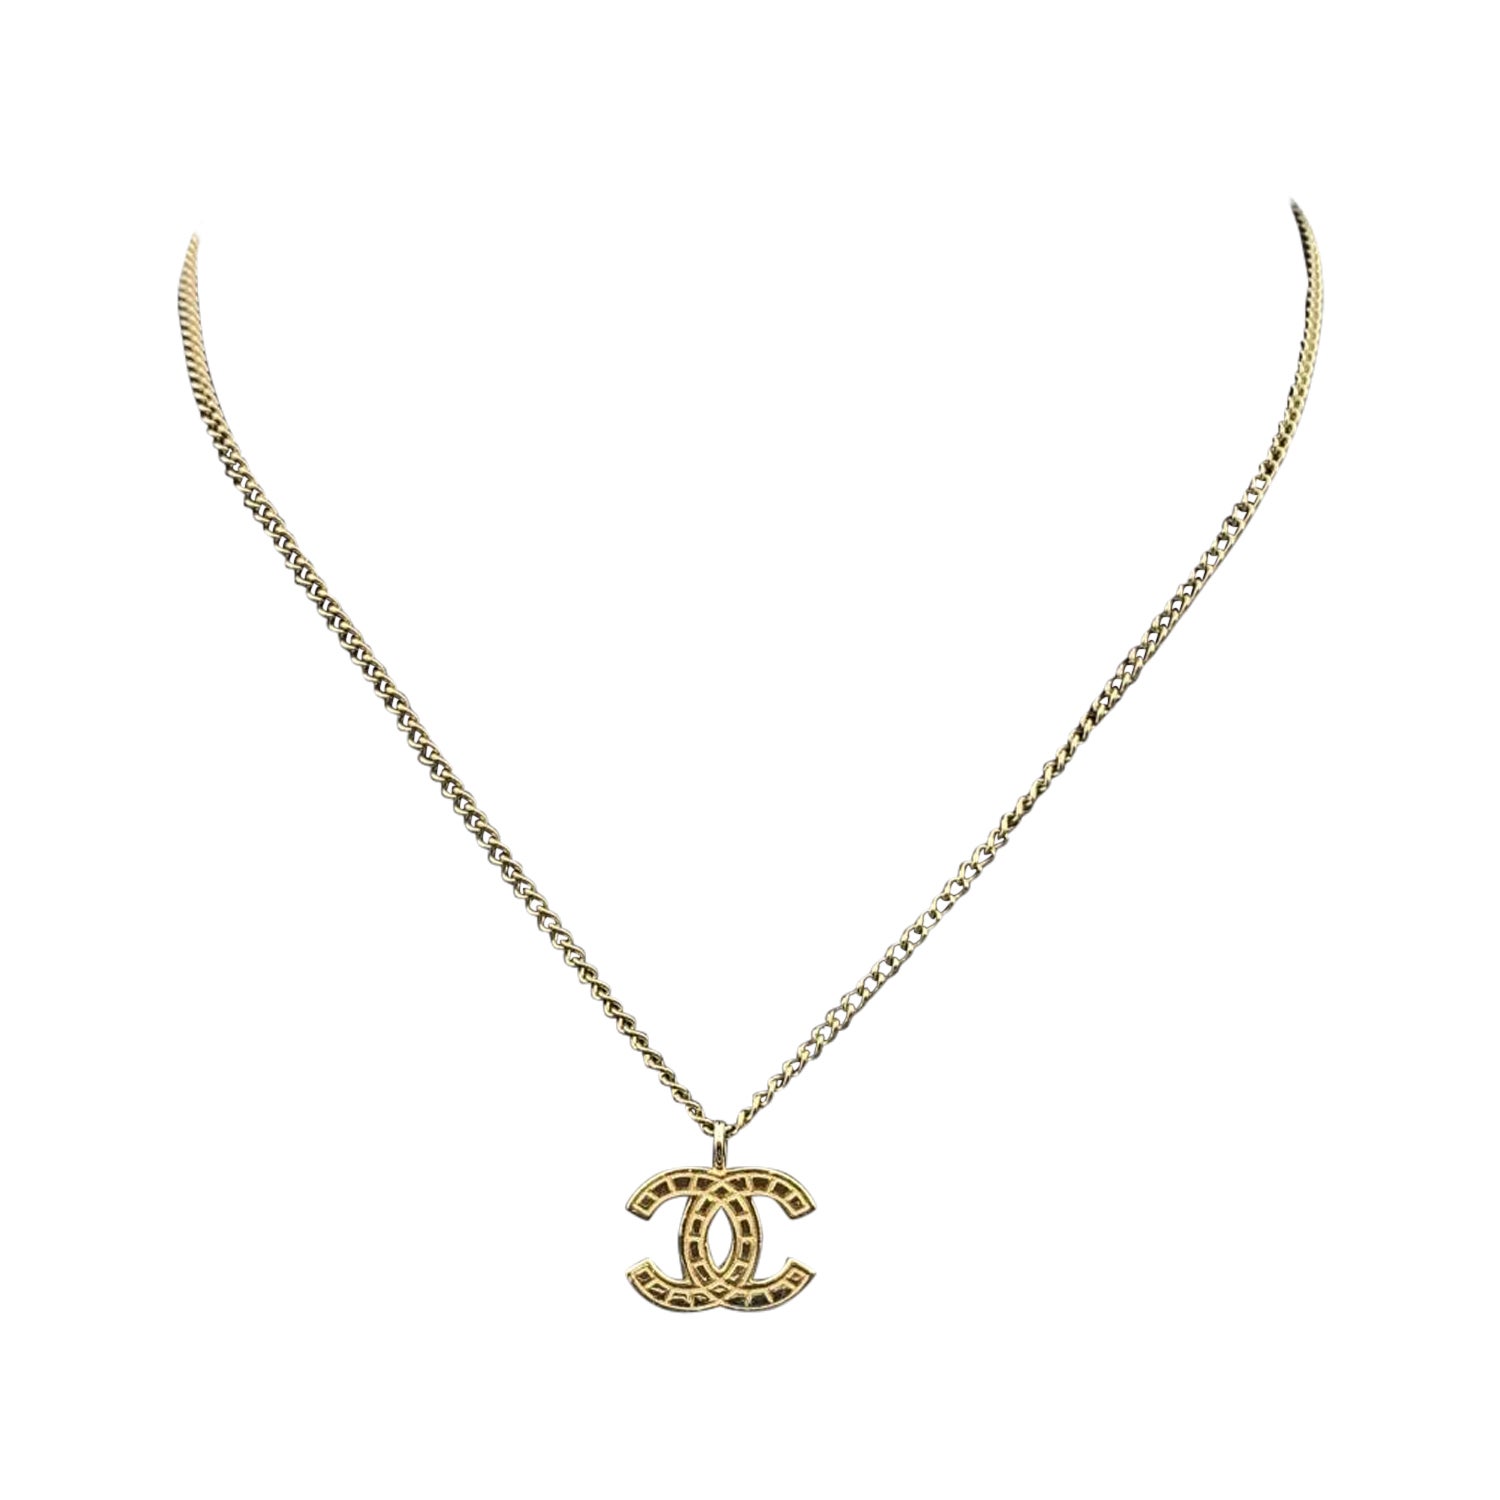 CHANEL, Jewelry, Chanel Here Mark Necklace Metal Gold 3859